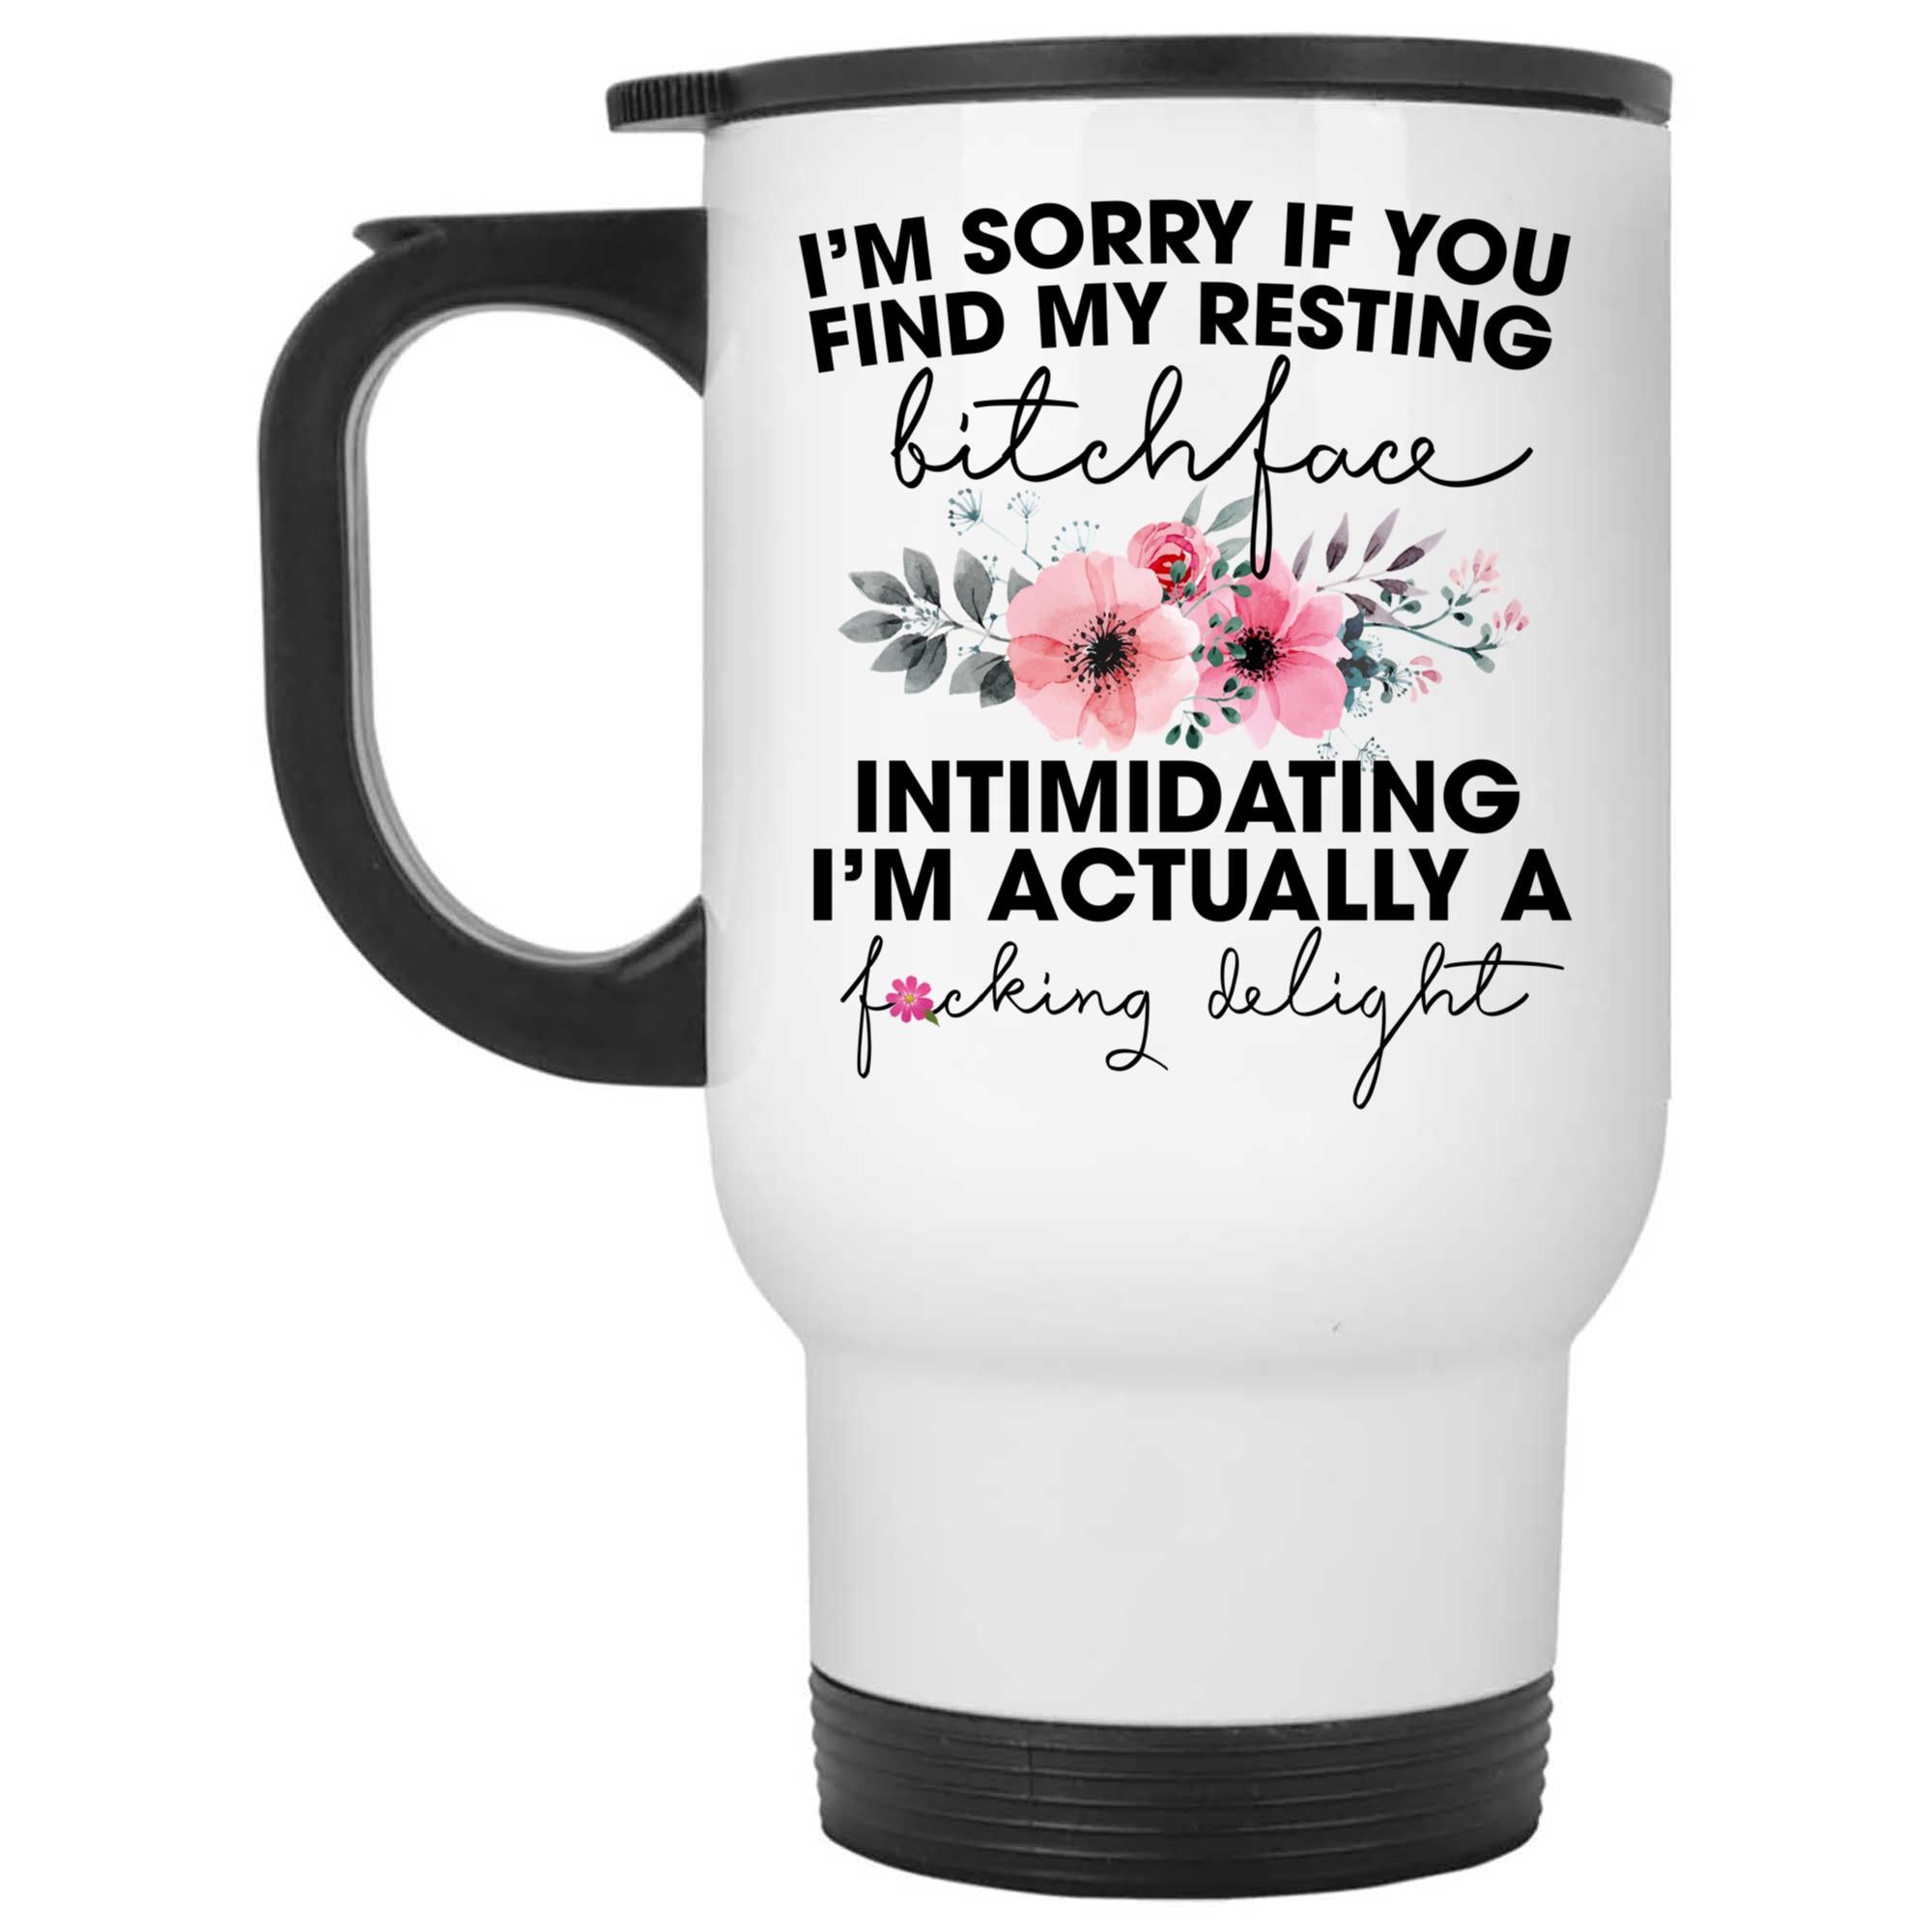 Skitongifts Funny Ceramic Coffee Mug Novelty M36-Nh241221-I'm Sorry If You Find My Resting Bitchface Intimidating I'm Actually A Fucking Delight